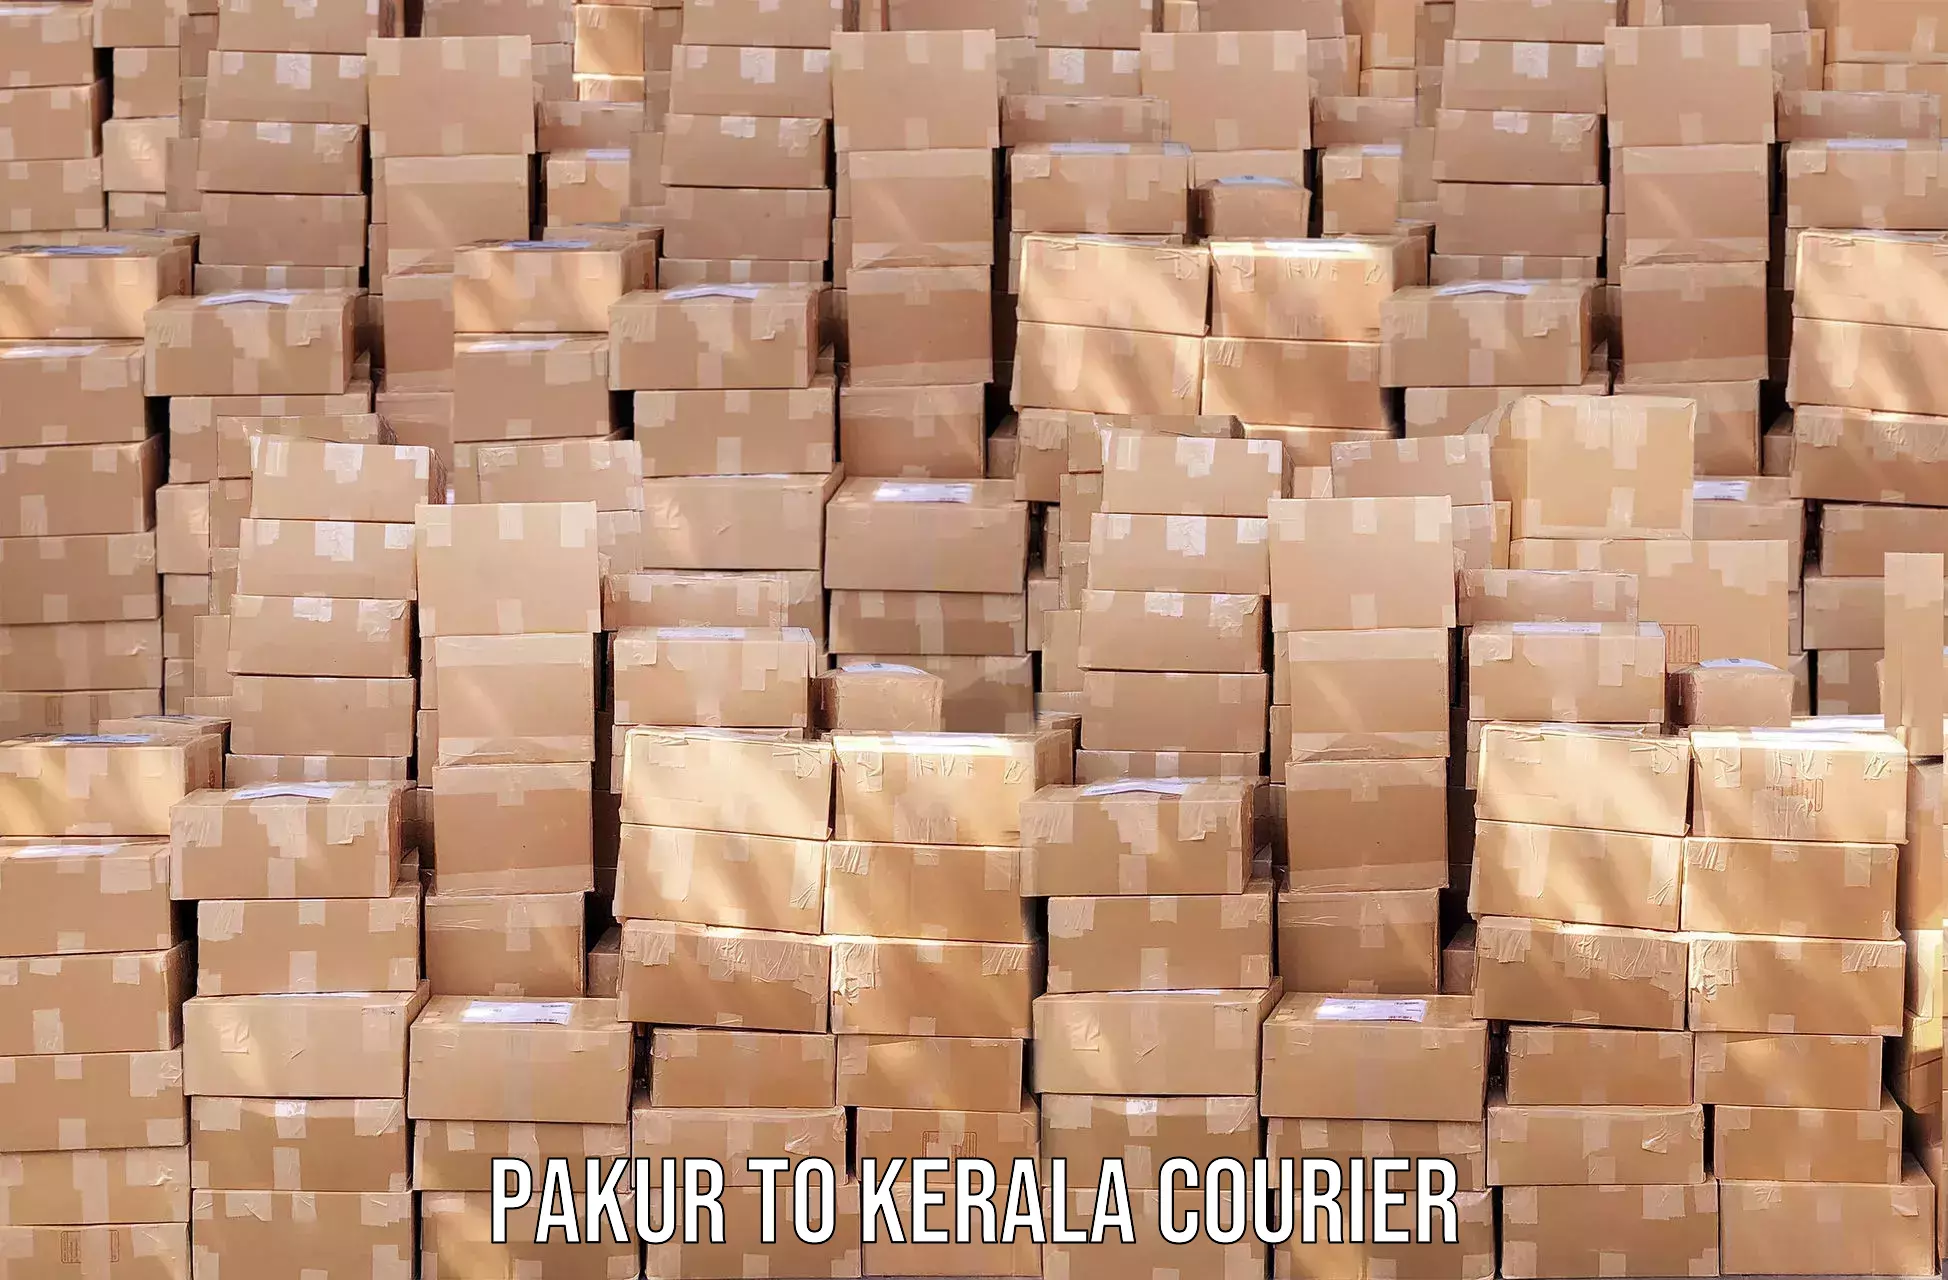 Same-day delivery solutions Pakur to Trivandrum